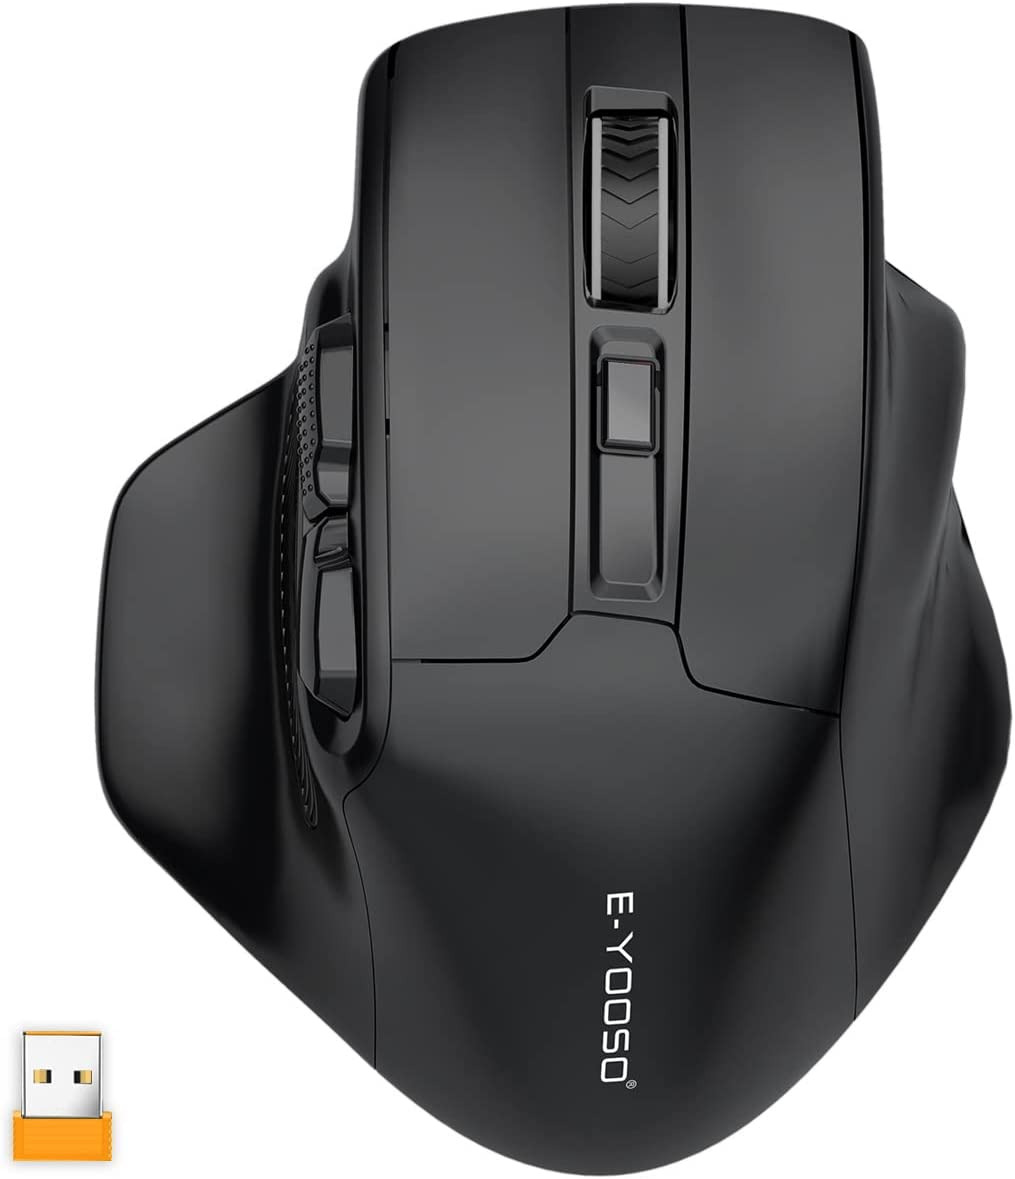 E-YOOSO Large Wireless Mouse, X-31 Large Mouse for Big Hands, 5-Level 4800 DPI, 